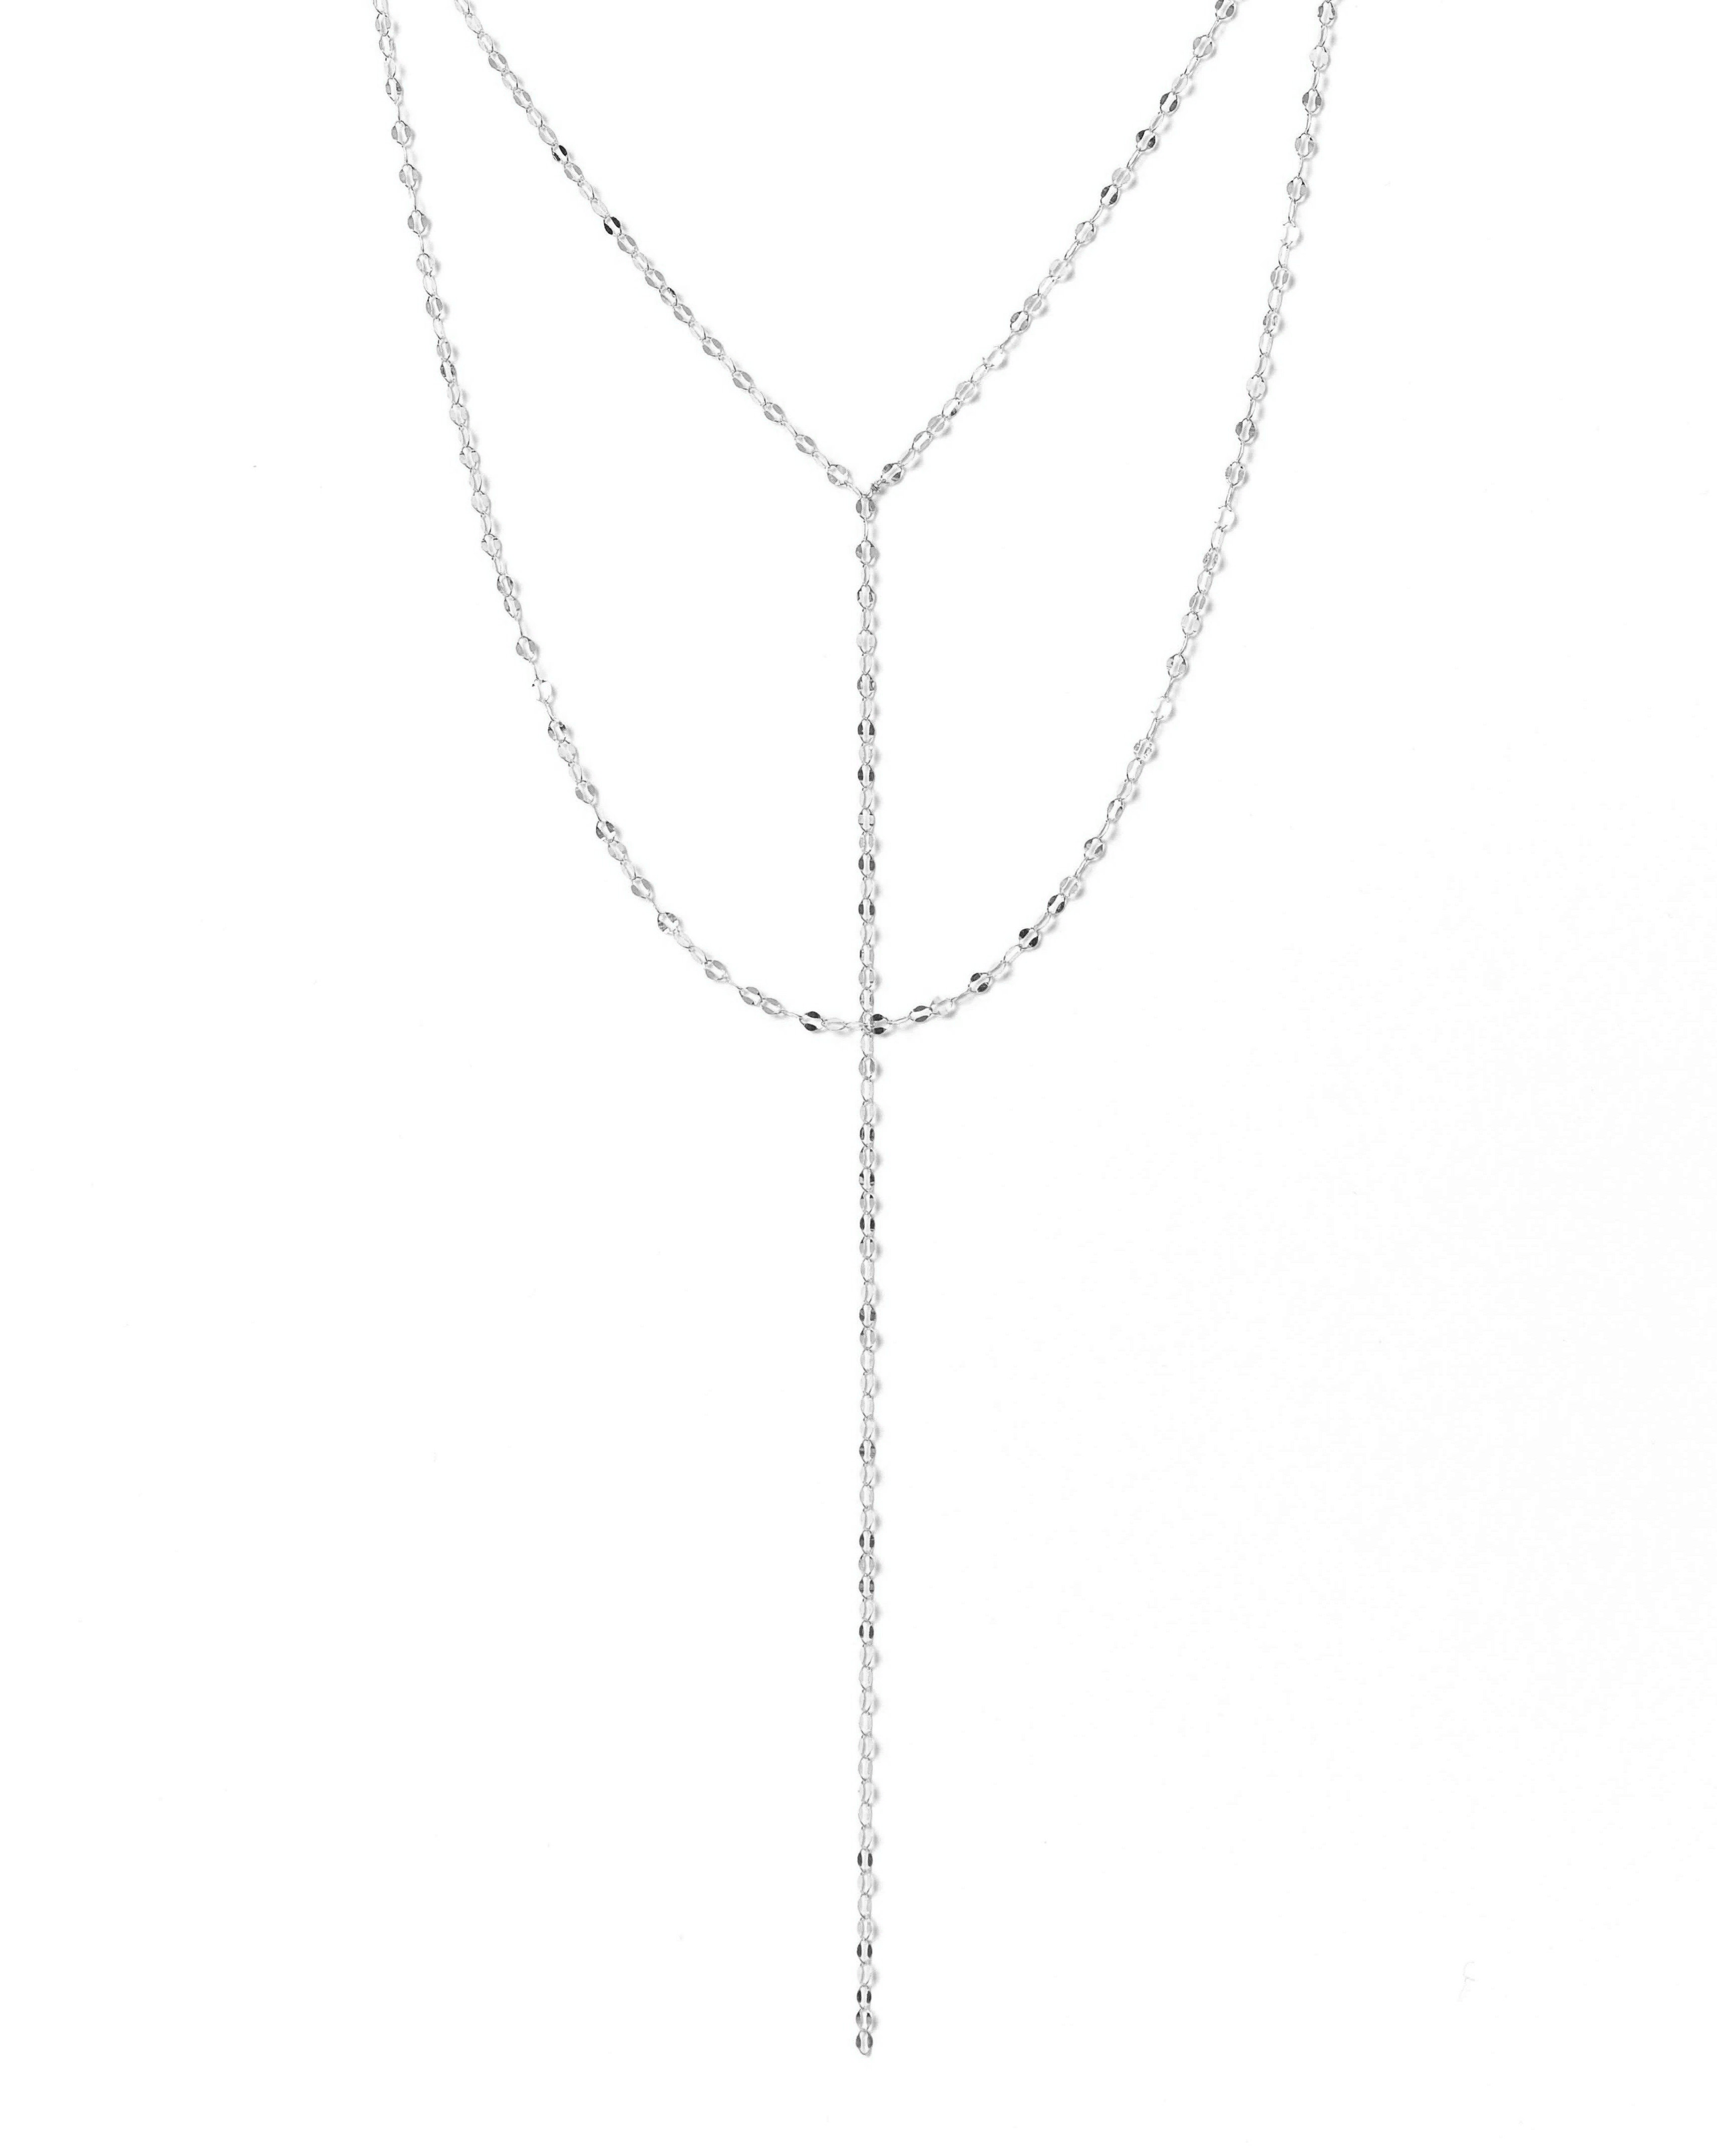 Jolila Necklace by KOZAKH. A 16 to 18 inch adjustable length double necklace, with long lariat style drop, crafted in Sterling Silver.